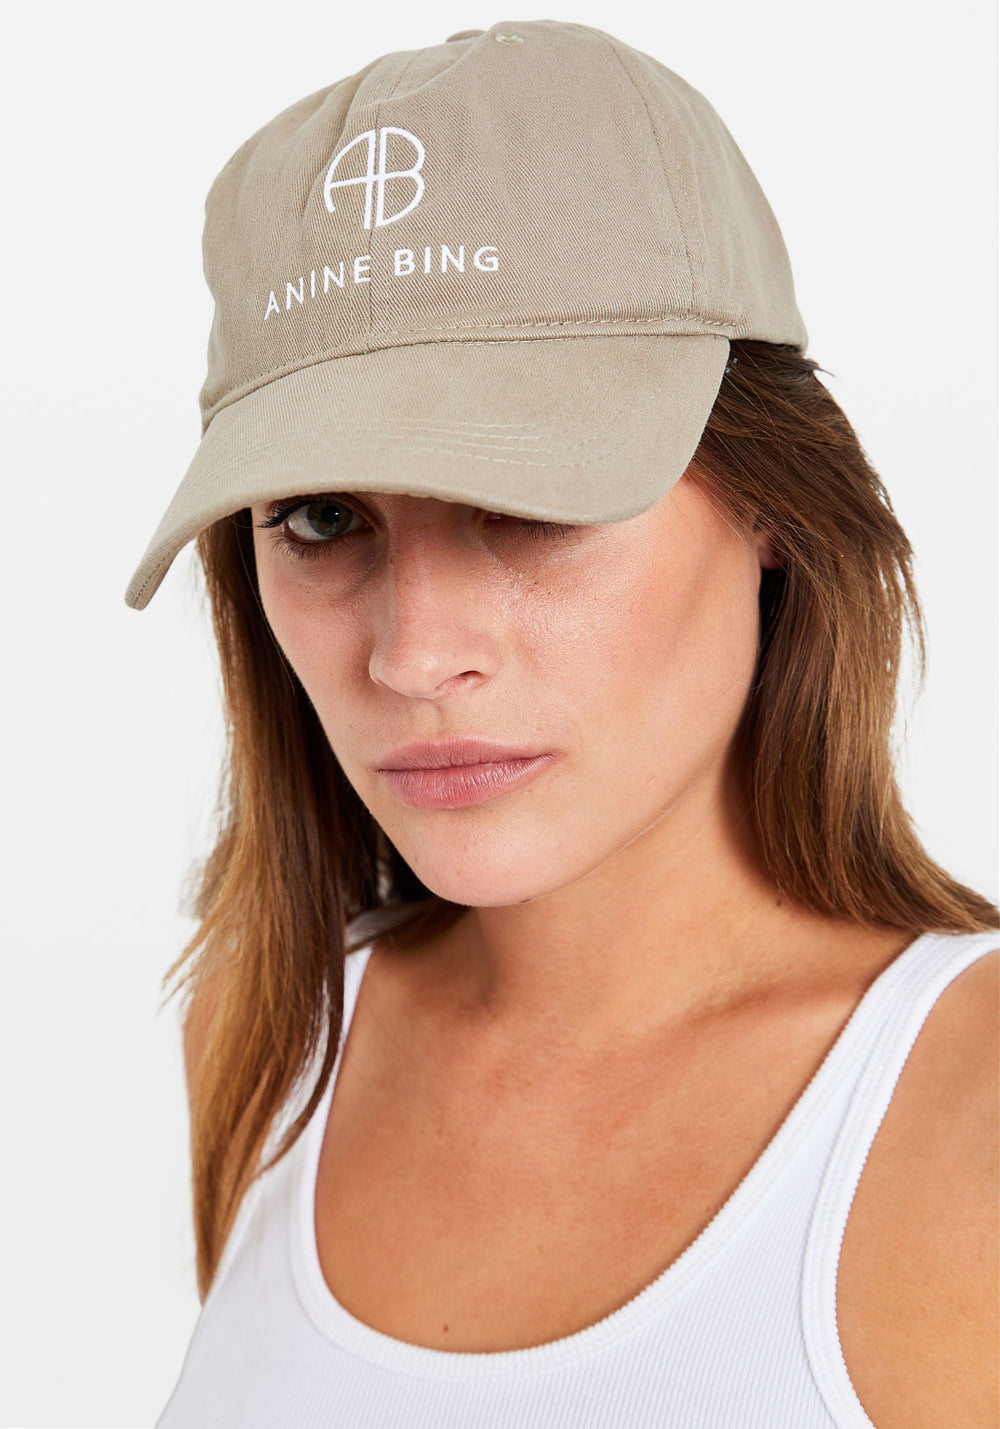 Green Jeremy Baseball Cap by Anine Bing - Ambiance Boutique